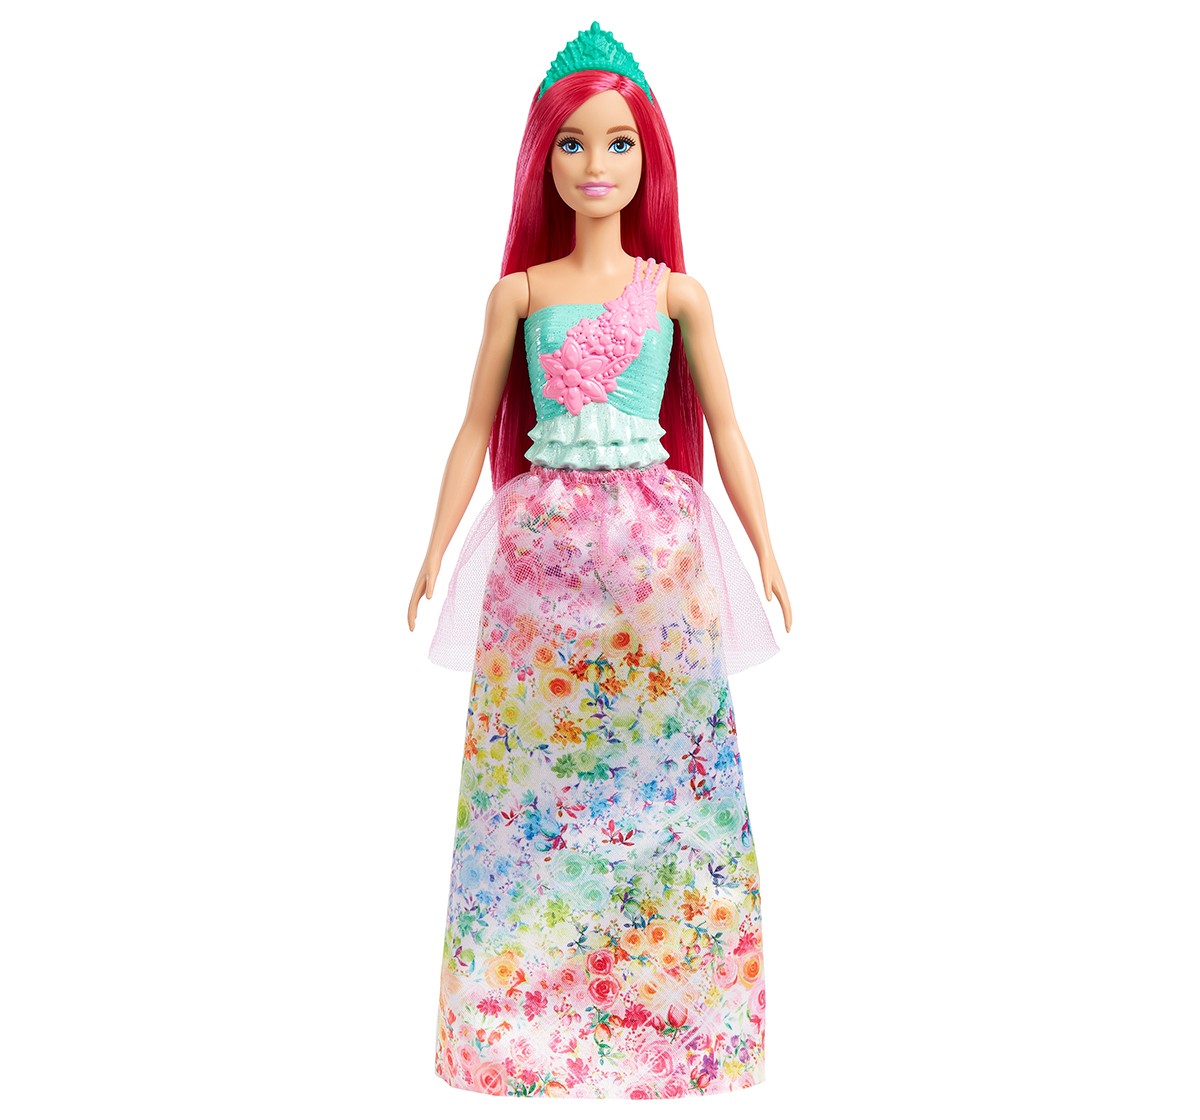 Barbie Dreamtopia Princess Doll, with Sparkly Bodice, Princess Skirt and Tiara, Kids for 3Y+, Assorted